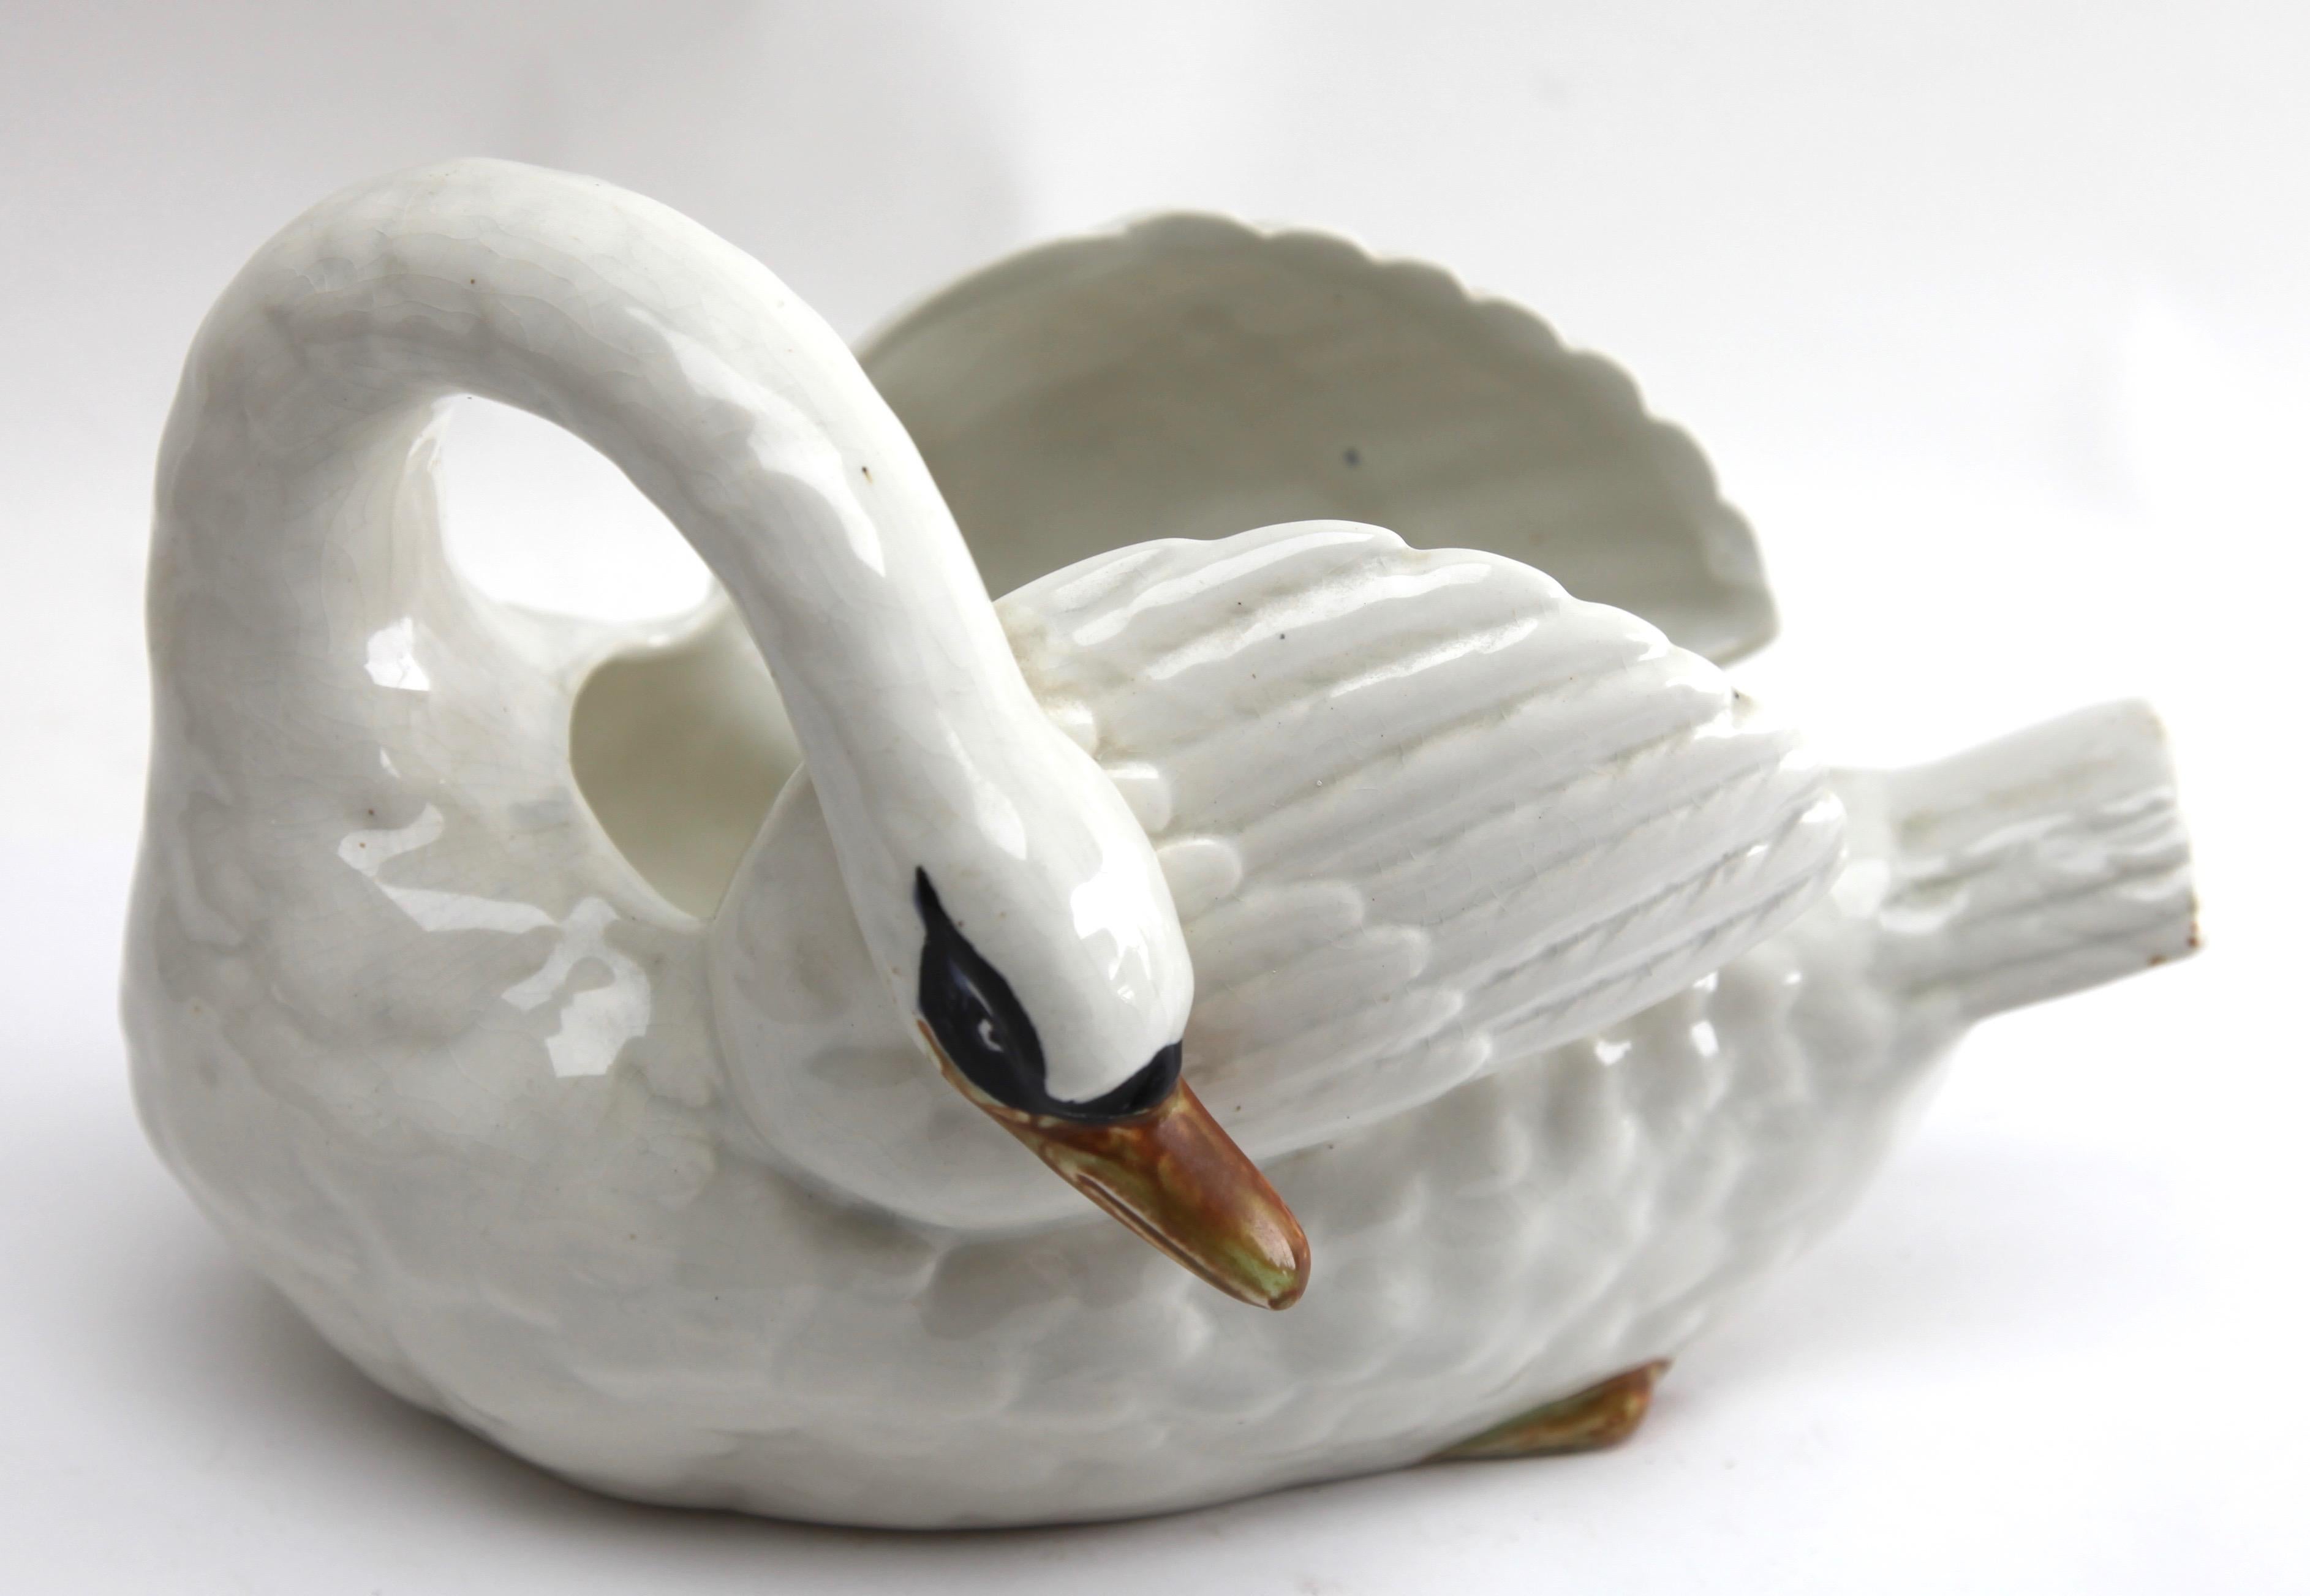 Majolica set of white swans jardinière stamped Imperiale Nimy, Belgium, circa 1900

Stamped: Nimy Faiences imperiale 1789-1951 Belgium.
Dimensions small one:
Height 5.51 inch
Width 8.66 inch
Depth 5.51 inch.

Please don't hesitate to get in touch